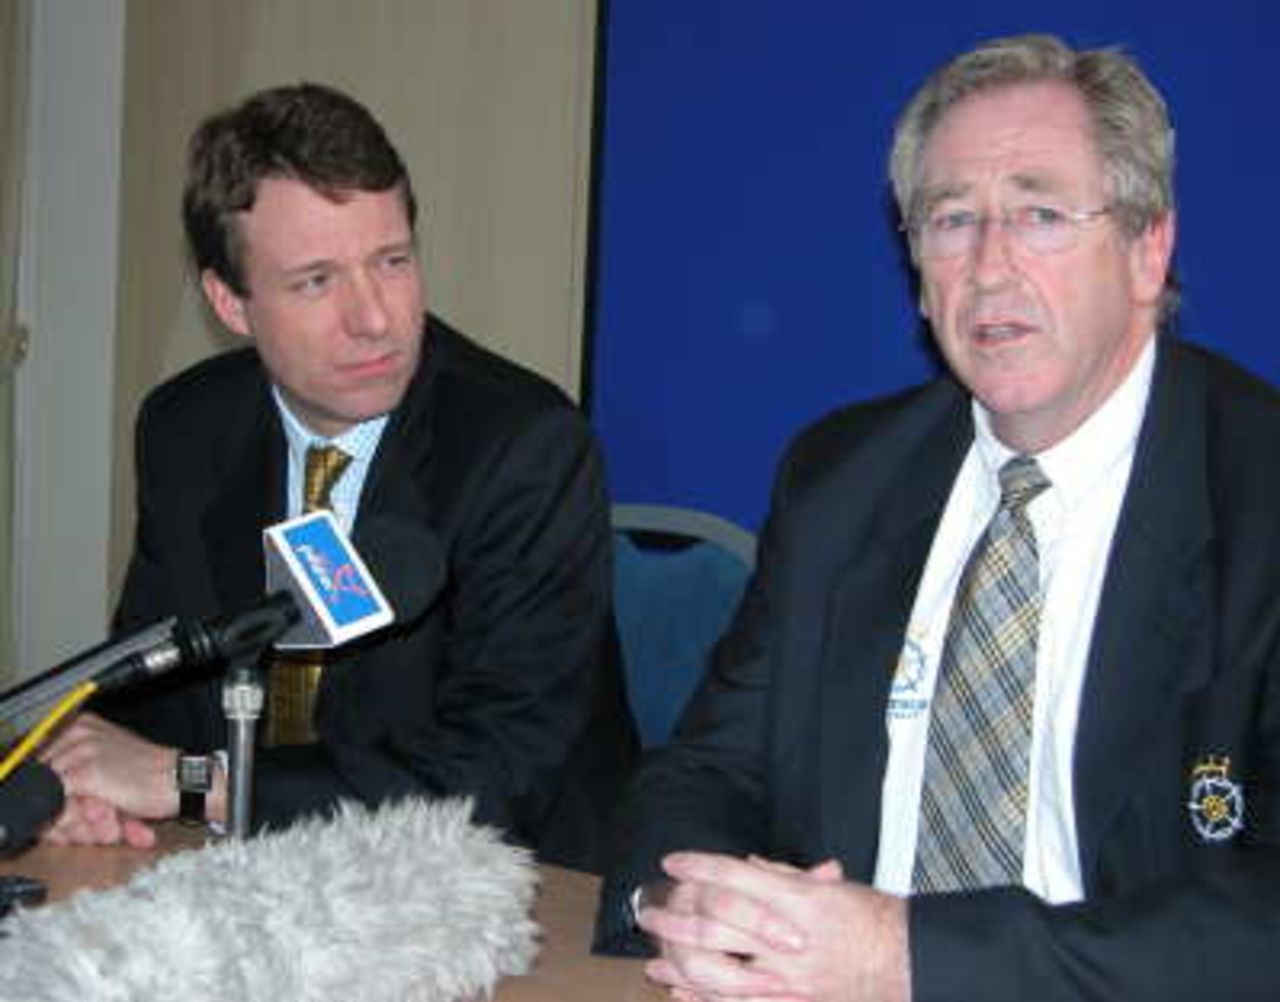 Hampshire Chairman Rod Bransgrove and Nike Pike Chief Esecutive address the press following the Shane Warne drug taking accusations at The Hampshire Rose Bowl